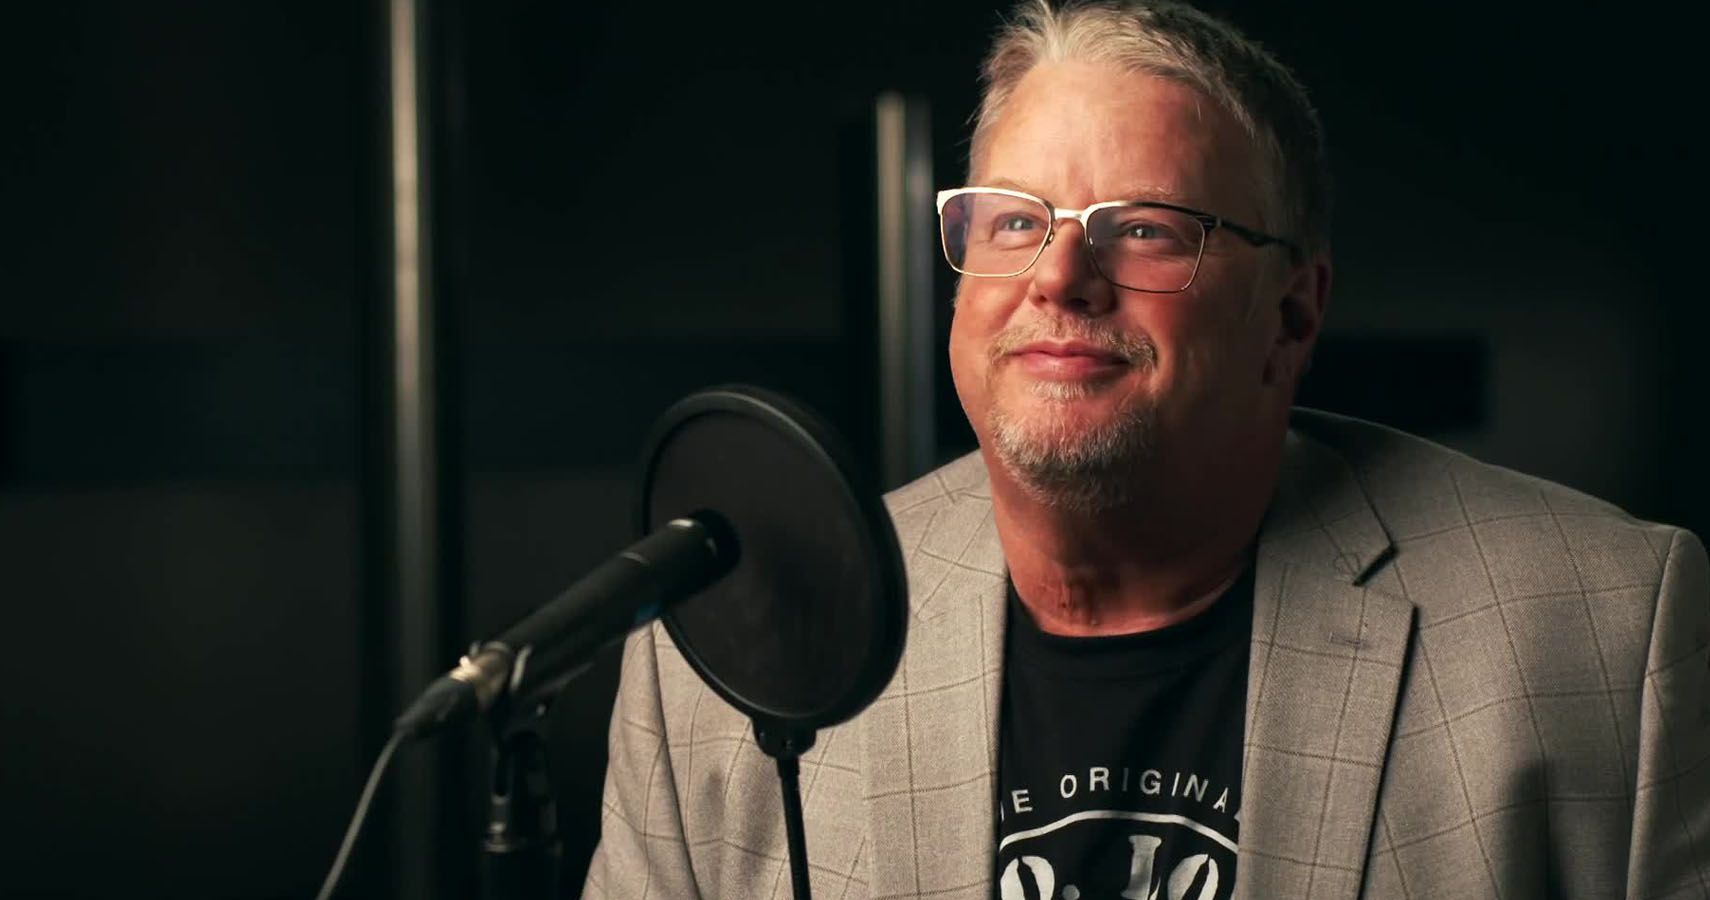 Bruce Prichard during his podcast